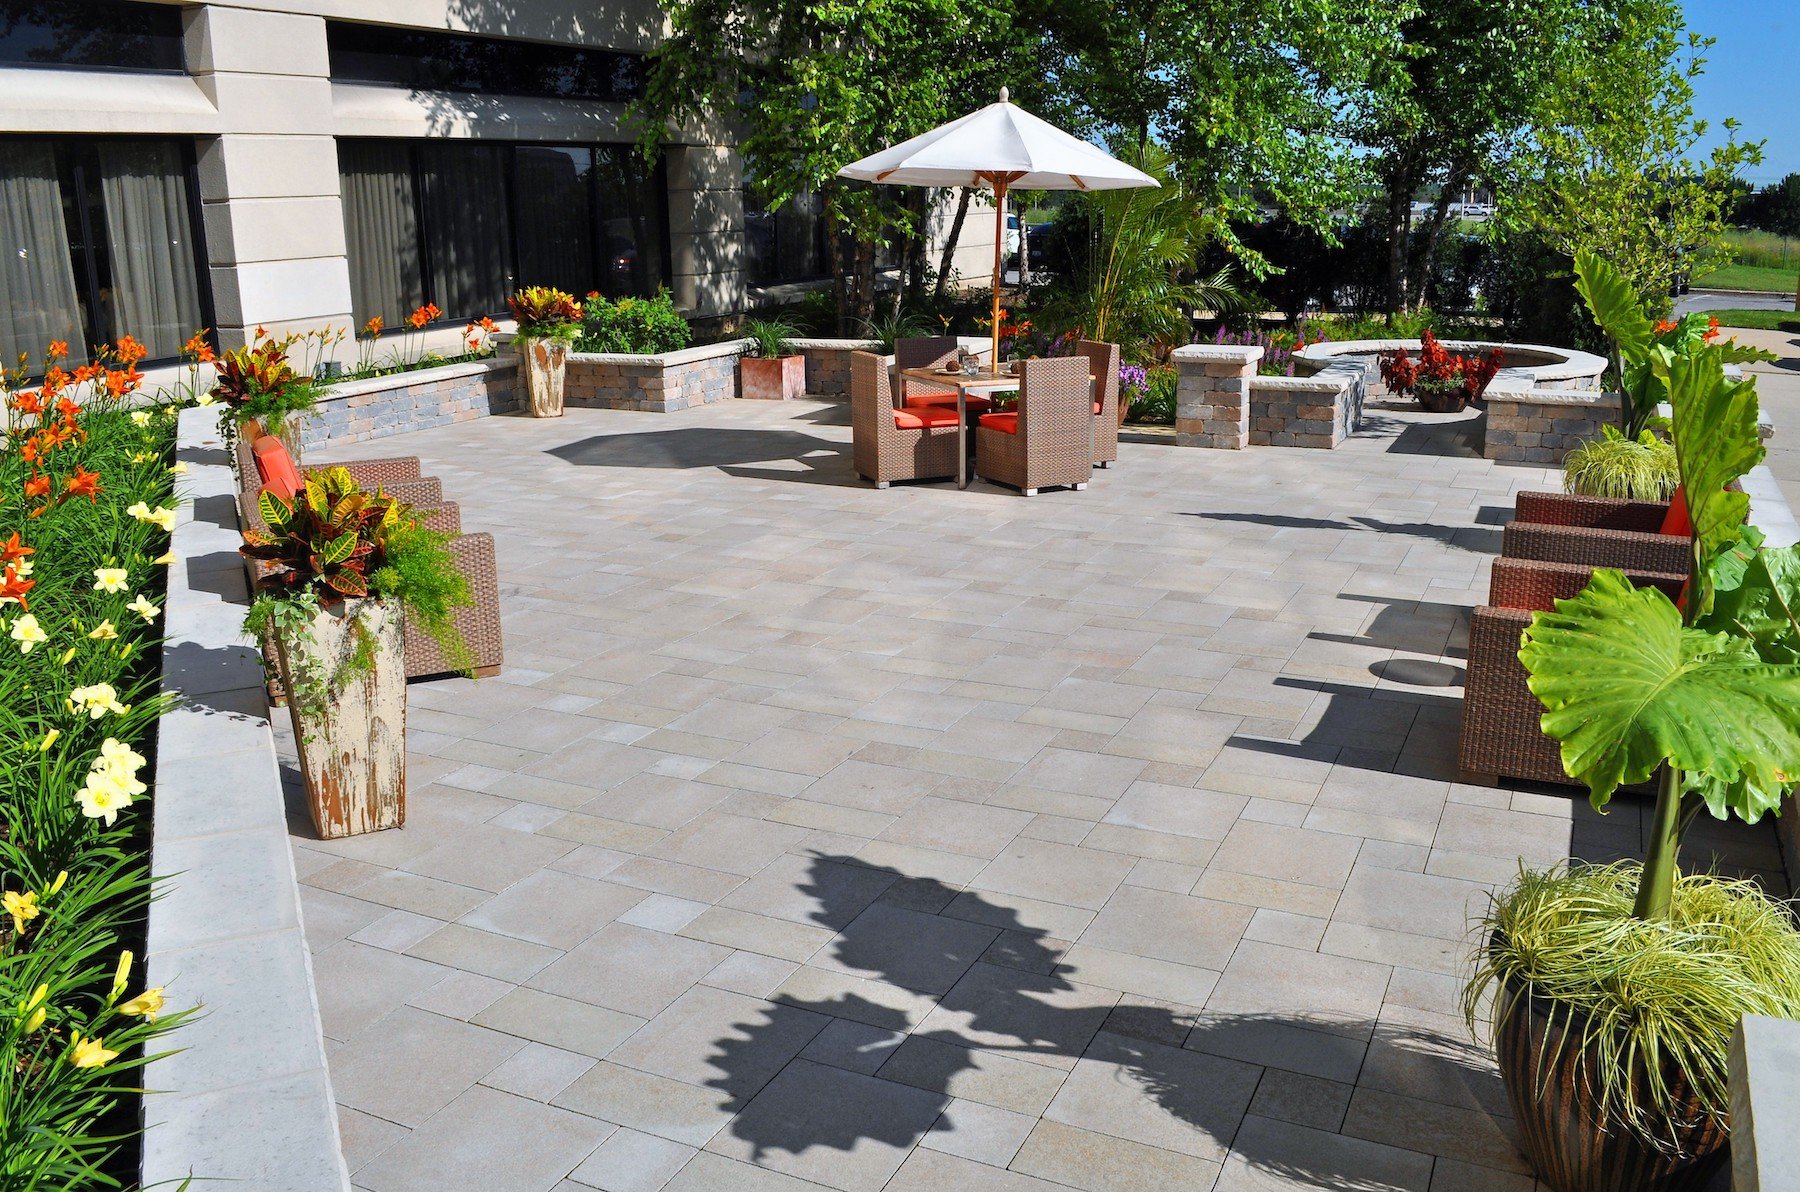 Questions To Ask Before Signing a Commercial Landscaping Contract